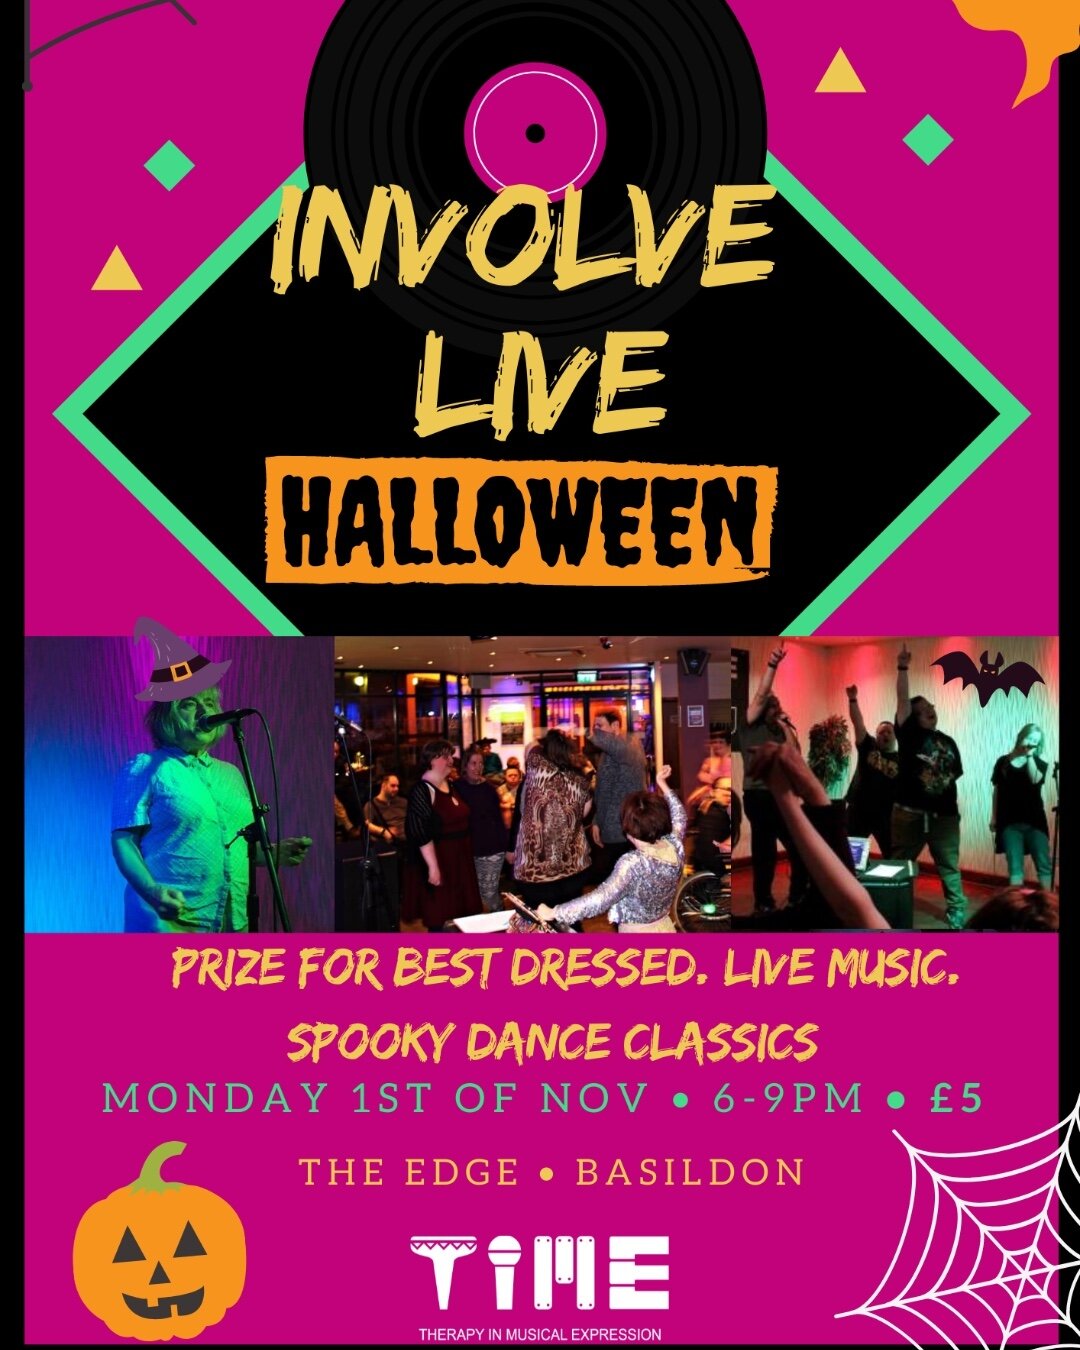 🎃 TONIGHT is our HALLOWEEN SPECIAL 🧟&zwj;♂️ Dress in your spookiest outfits, grab your friends and get ready for a night of terror. 👻
Prizes for best dressed! 👹

INVOLVE DISABILITY NIGHT CLUB  Every Monday. The Edge Bar - Basildon. 6-9pm &pound;5